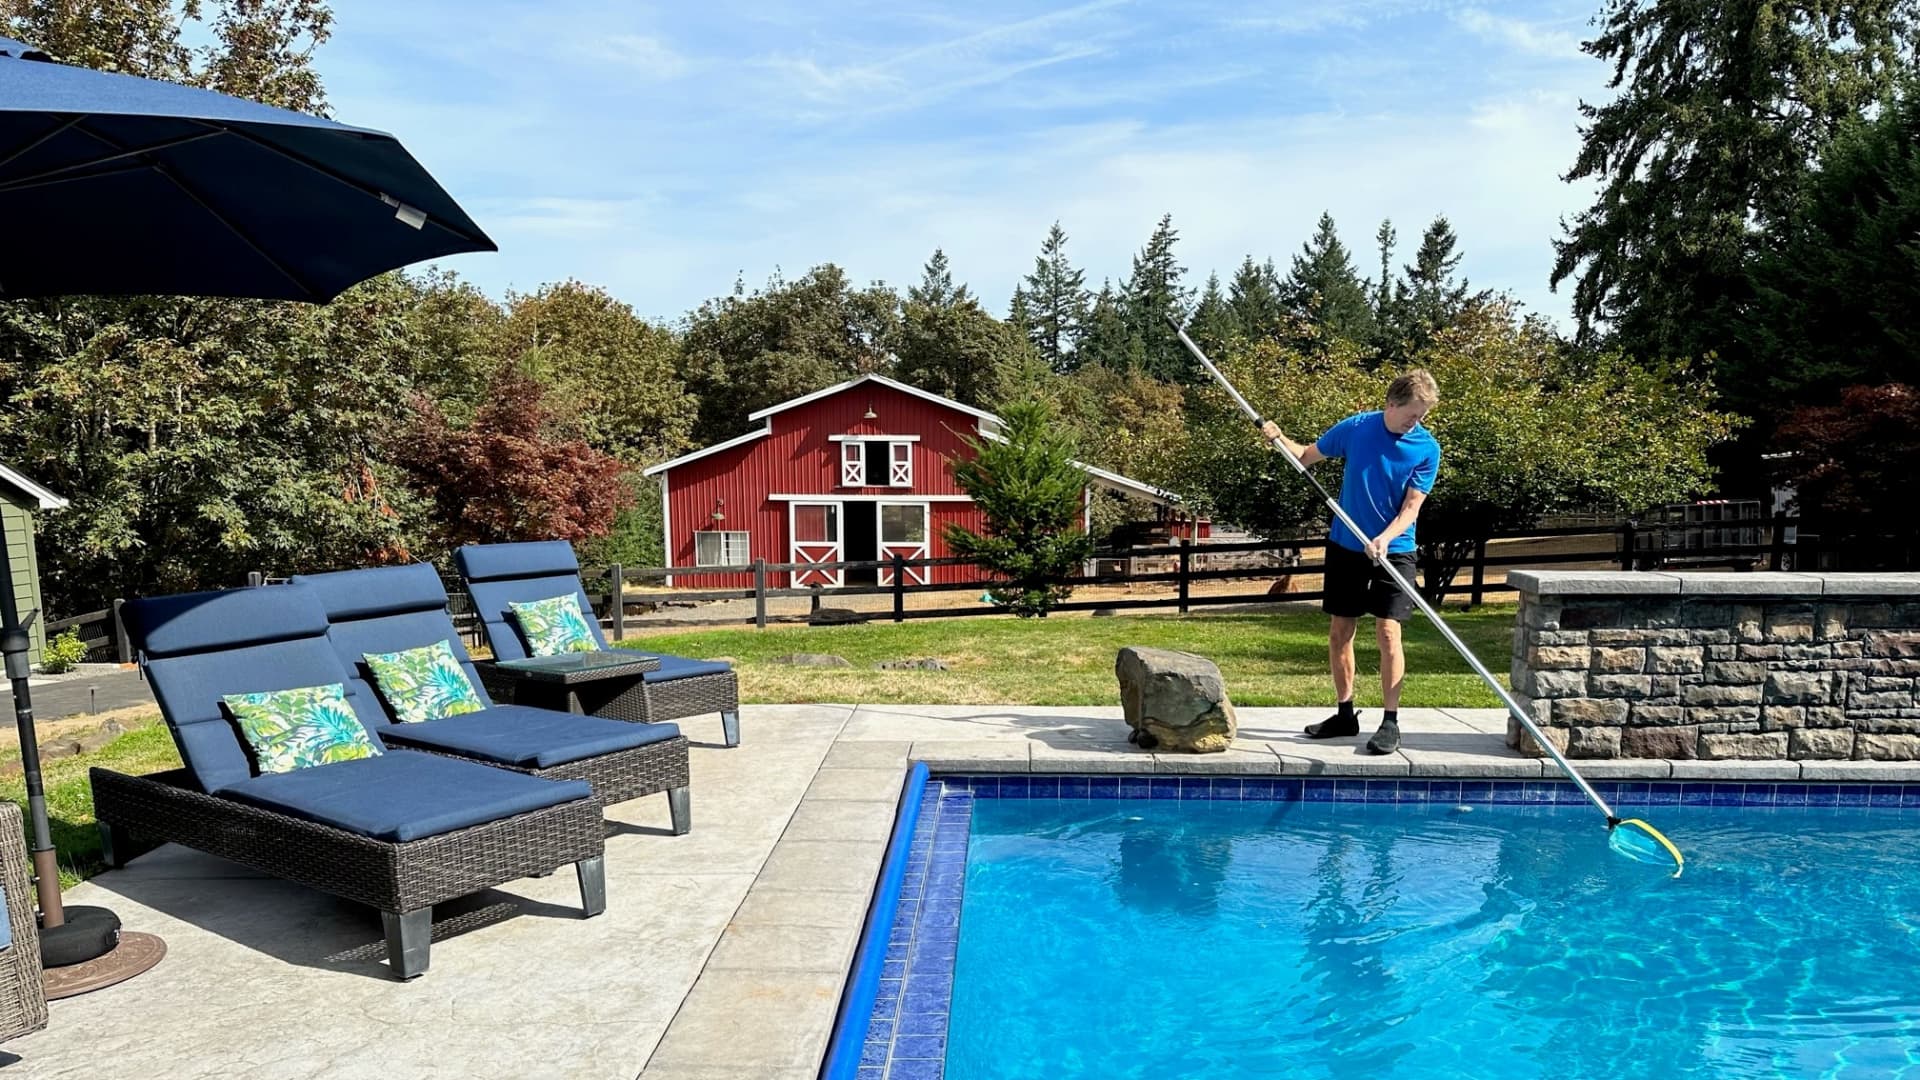 Jim Battan, 58, has made nearly $200,000 renting out his backyard pool. But he says his lucrative side hustle requires a lot of time, money and the right mindset to succeed.